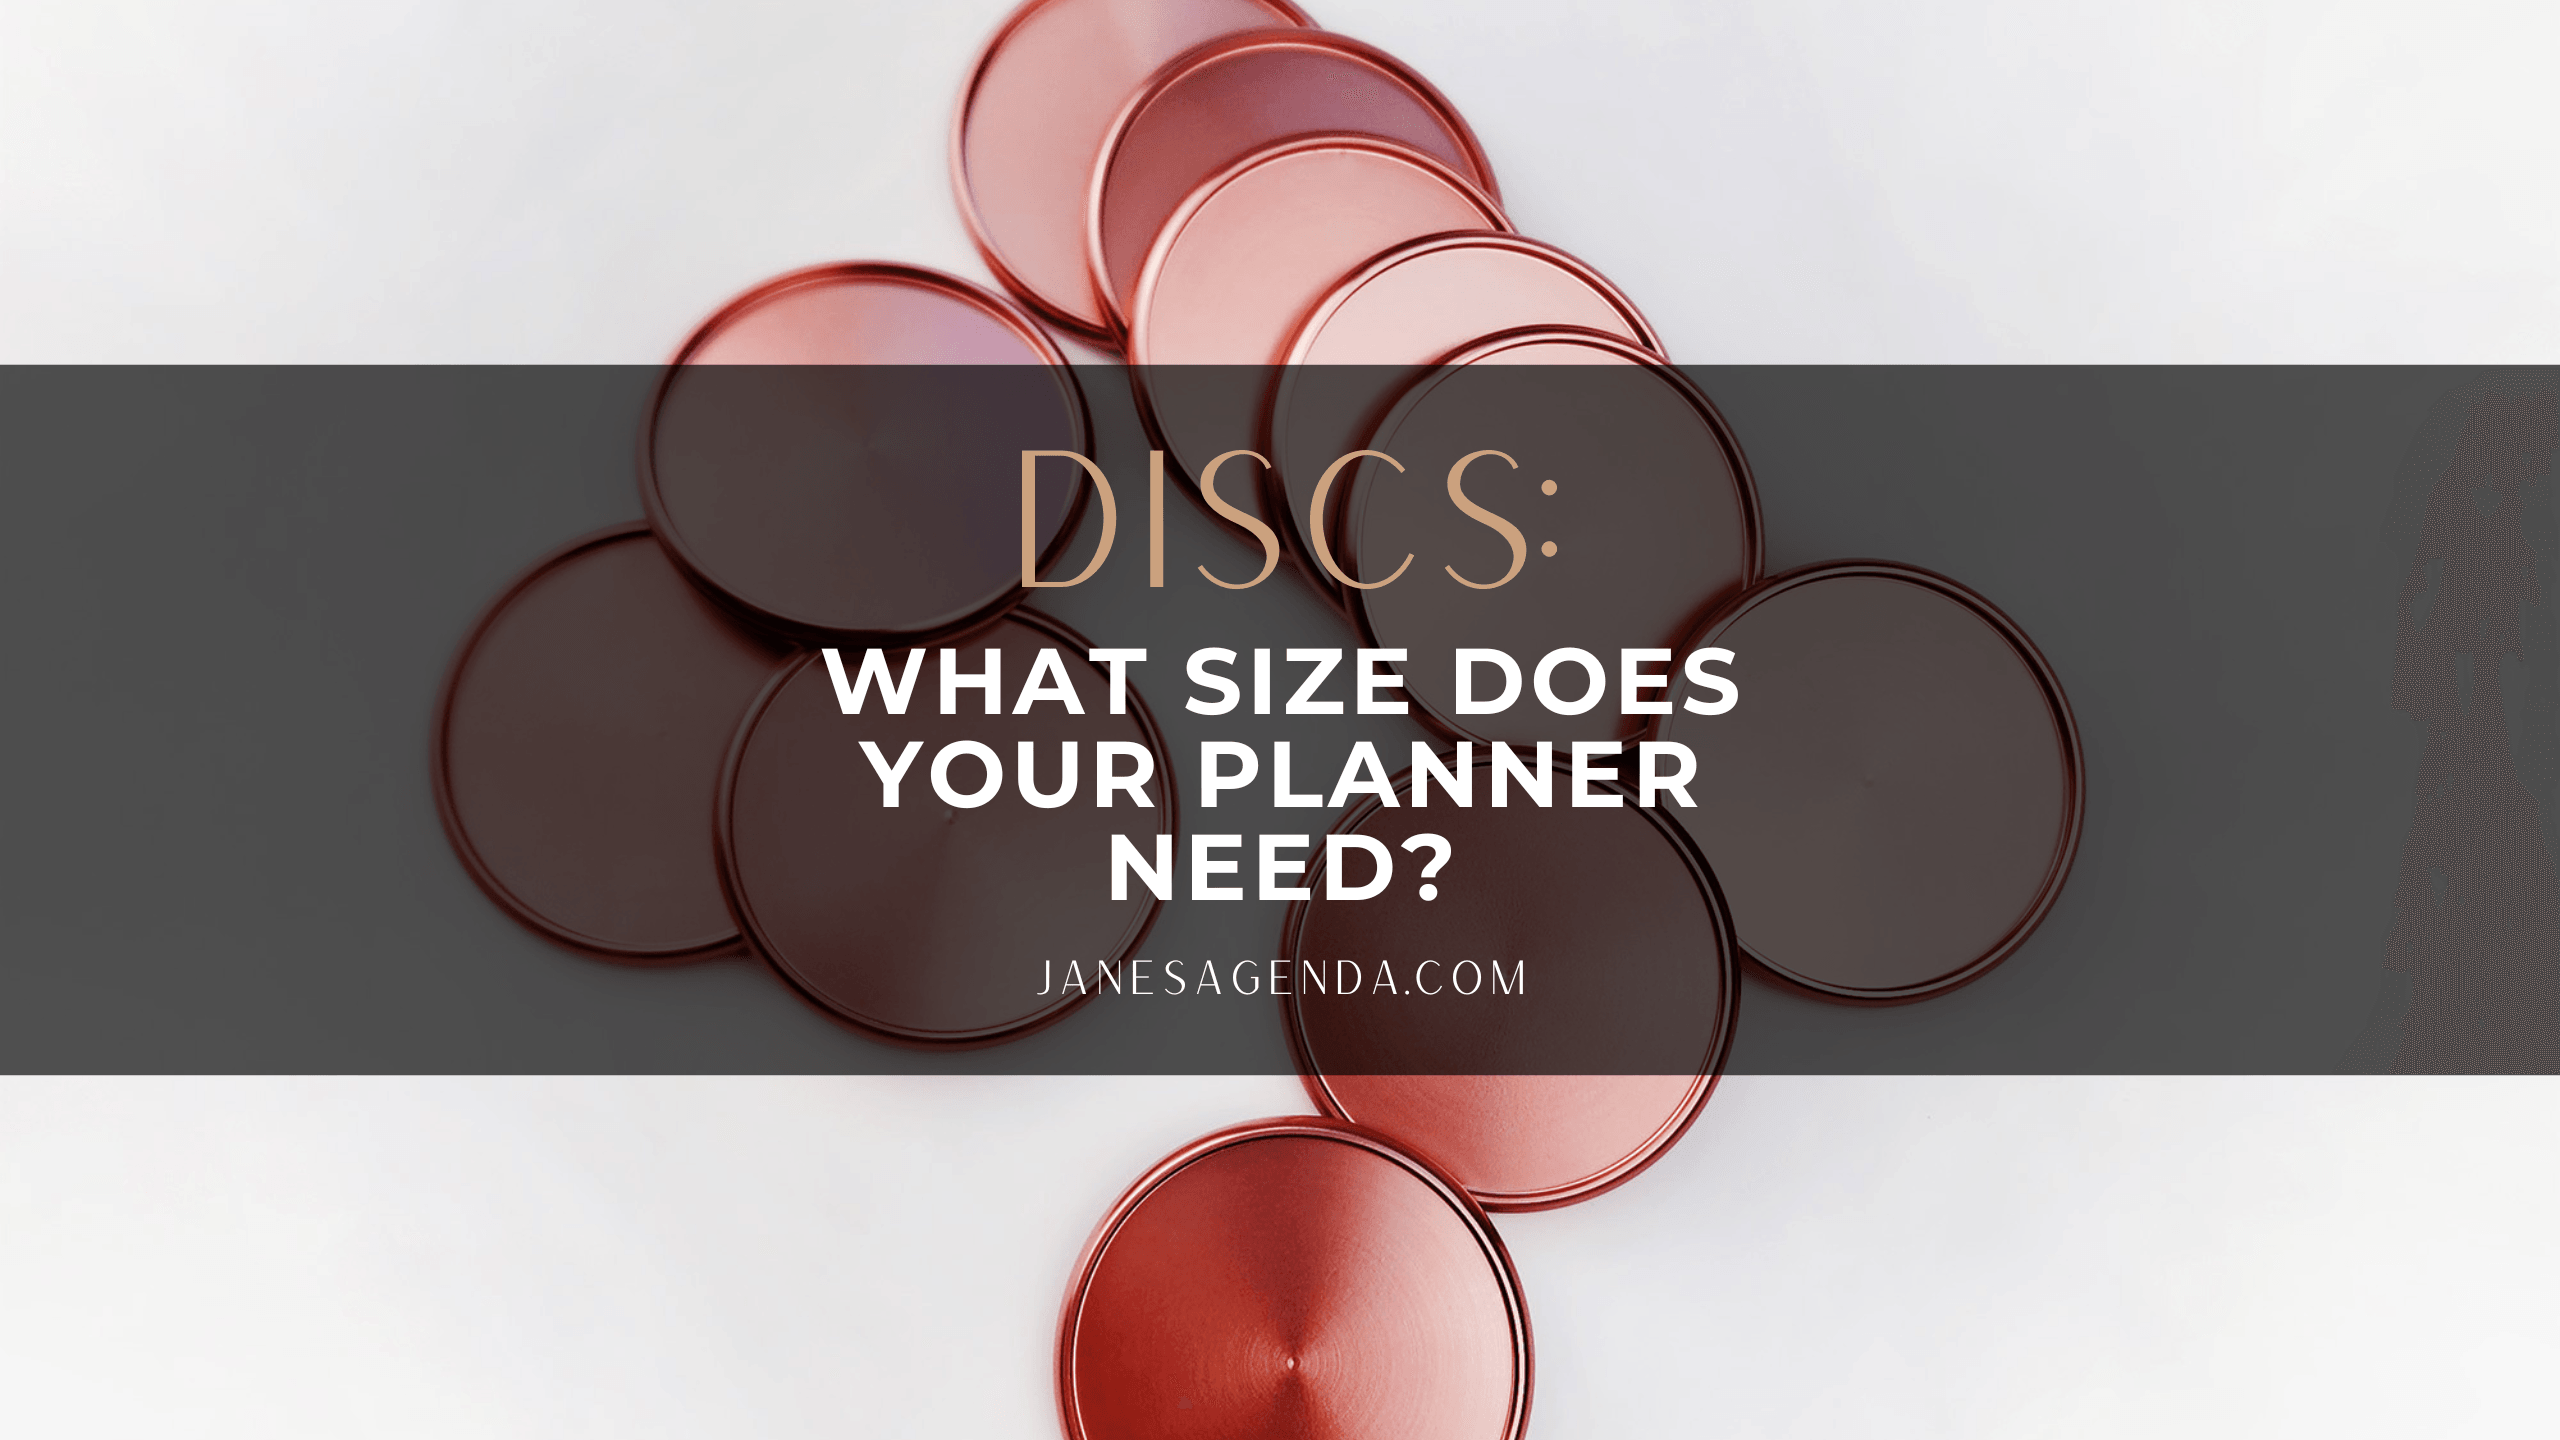 Blog post, what size discs does your planner need